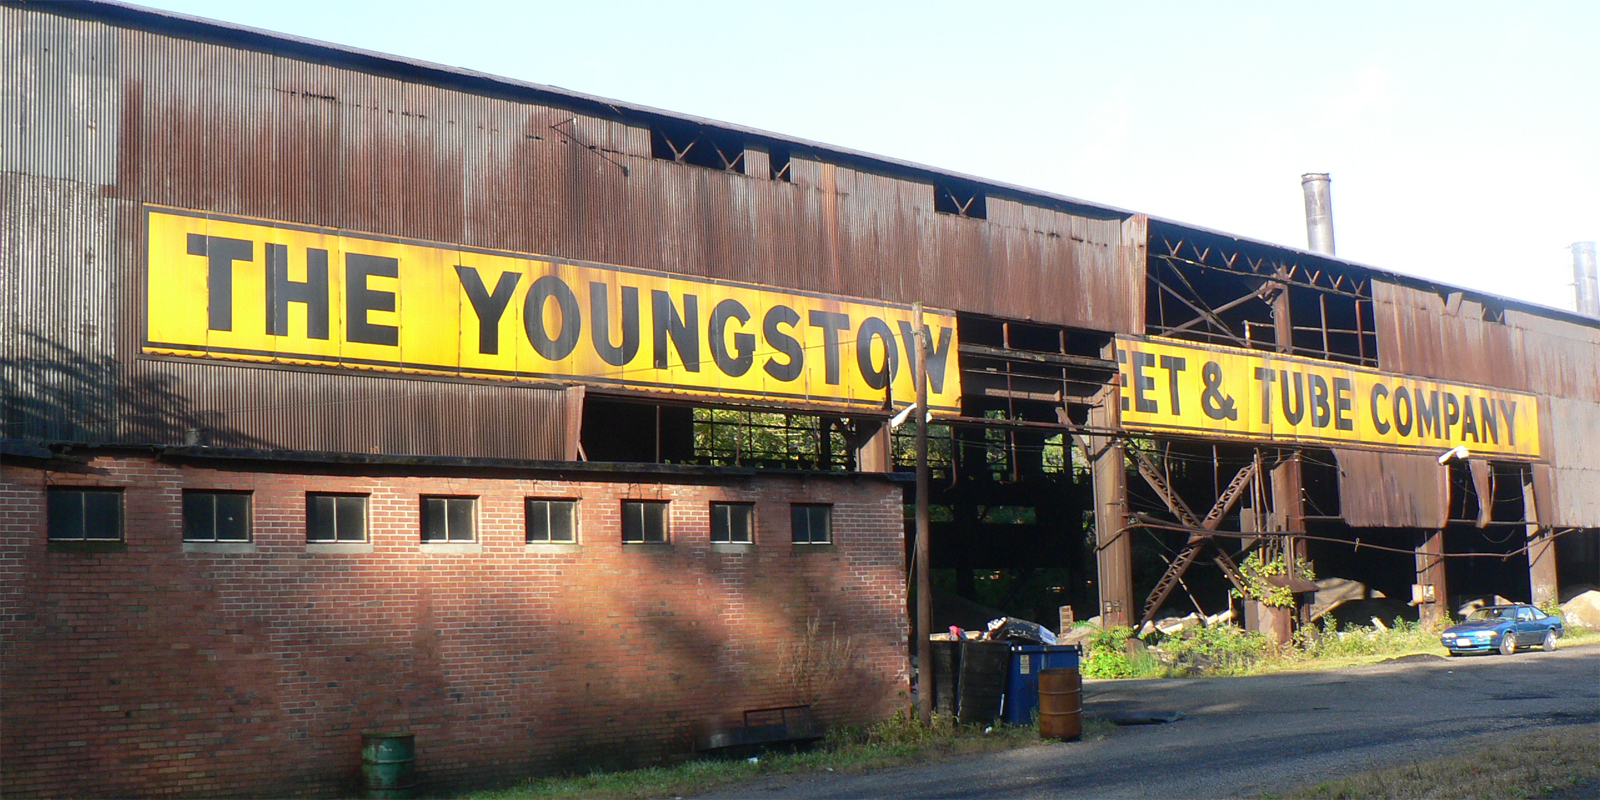 Youngstown Sheet & Tube Company